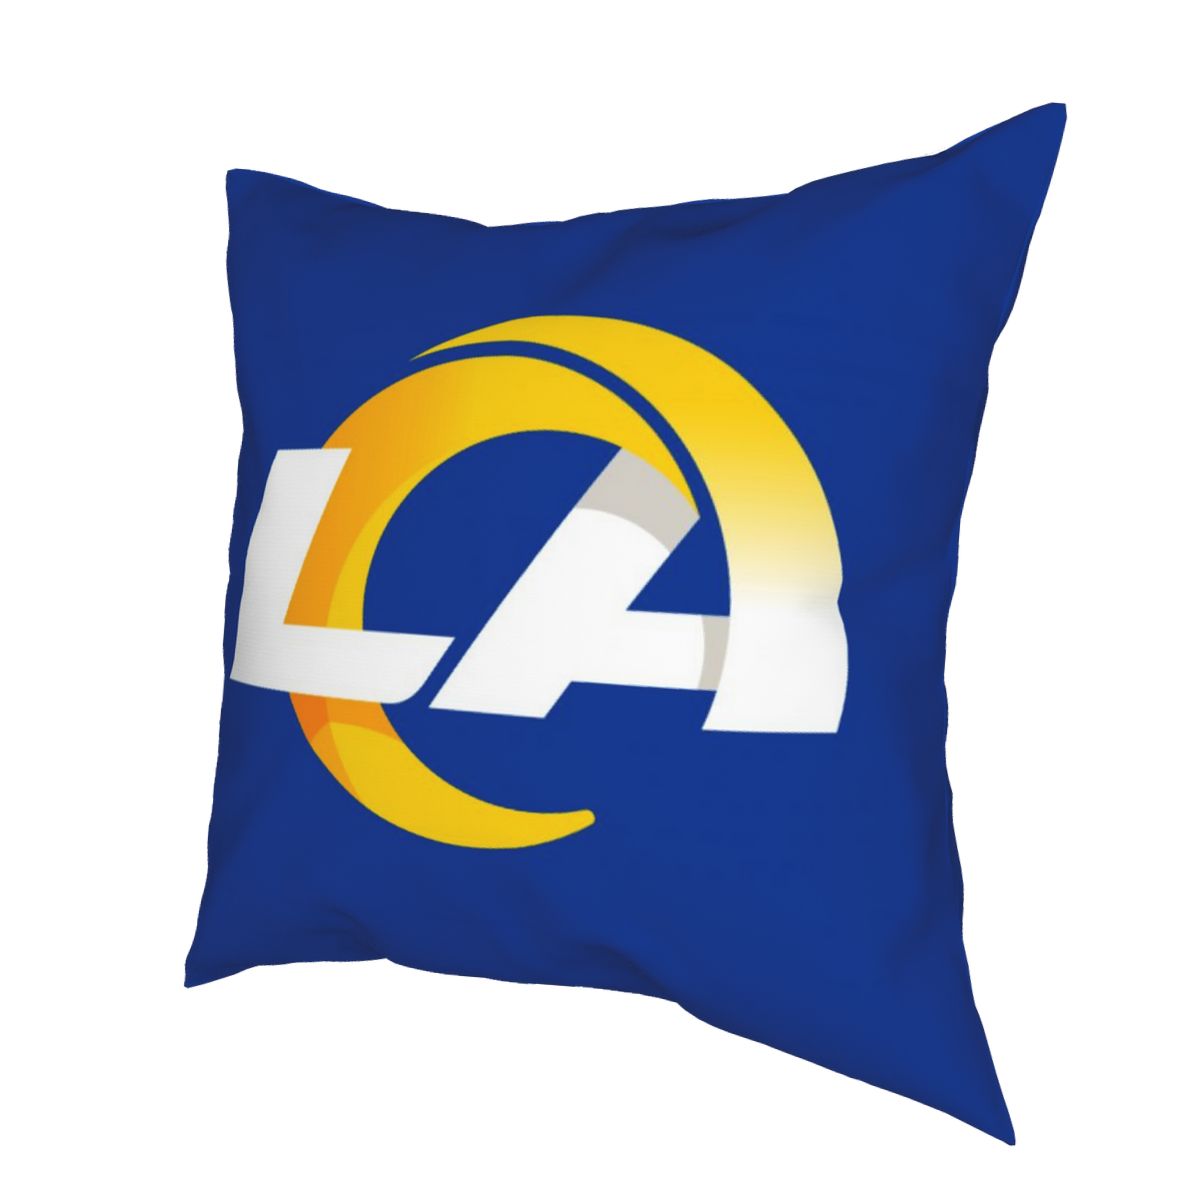 Custom Decorative Football Pillow Case 2020 New Los Angeles Rams Blue Pillowcase Personalized Throw Pillow Covers